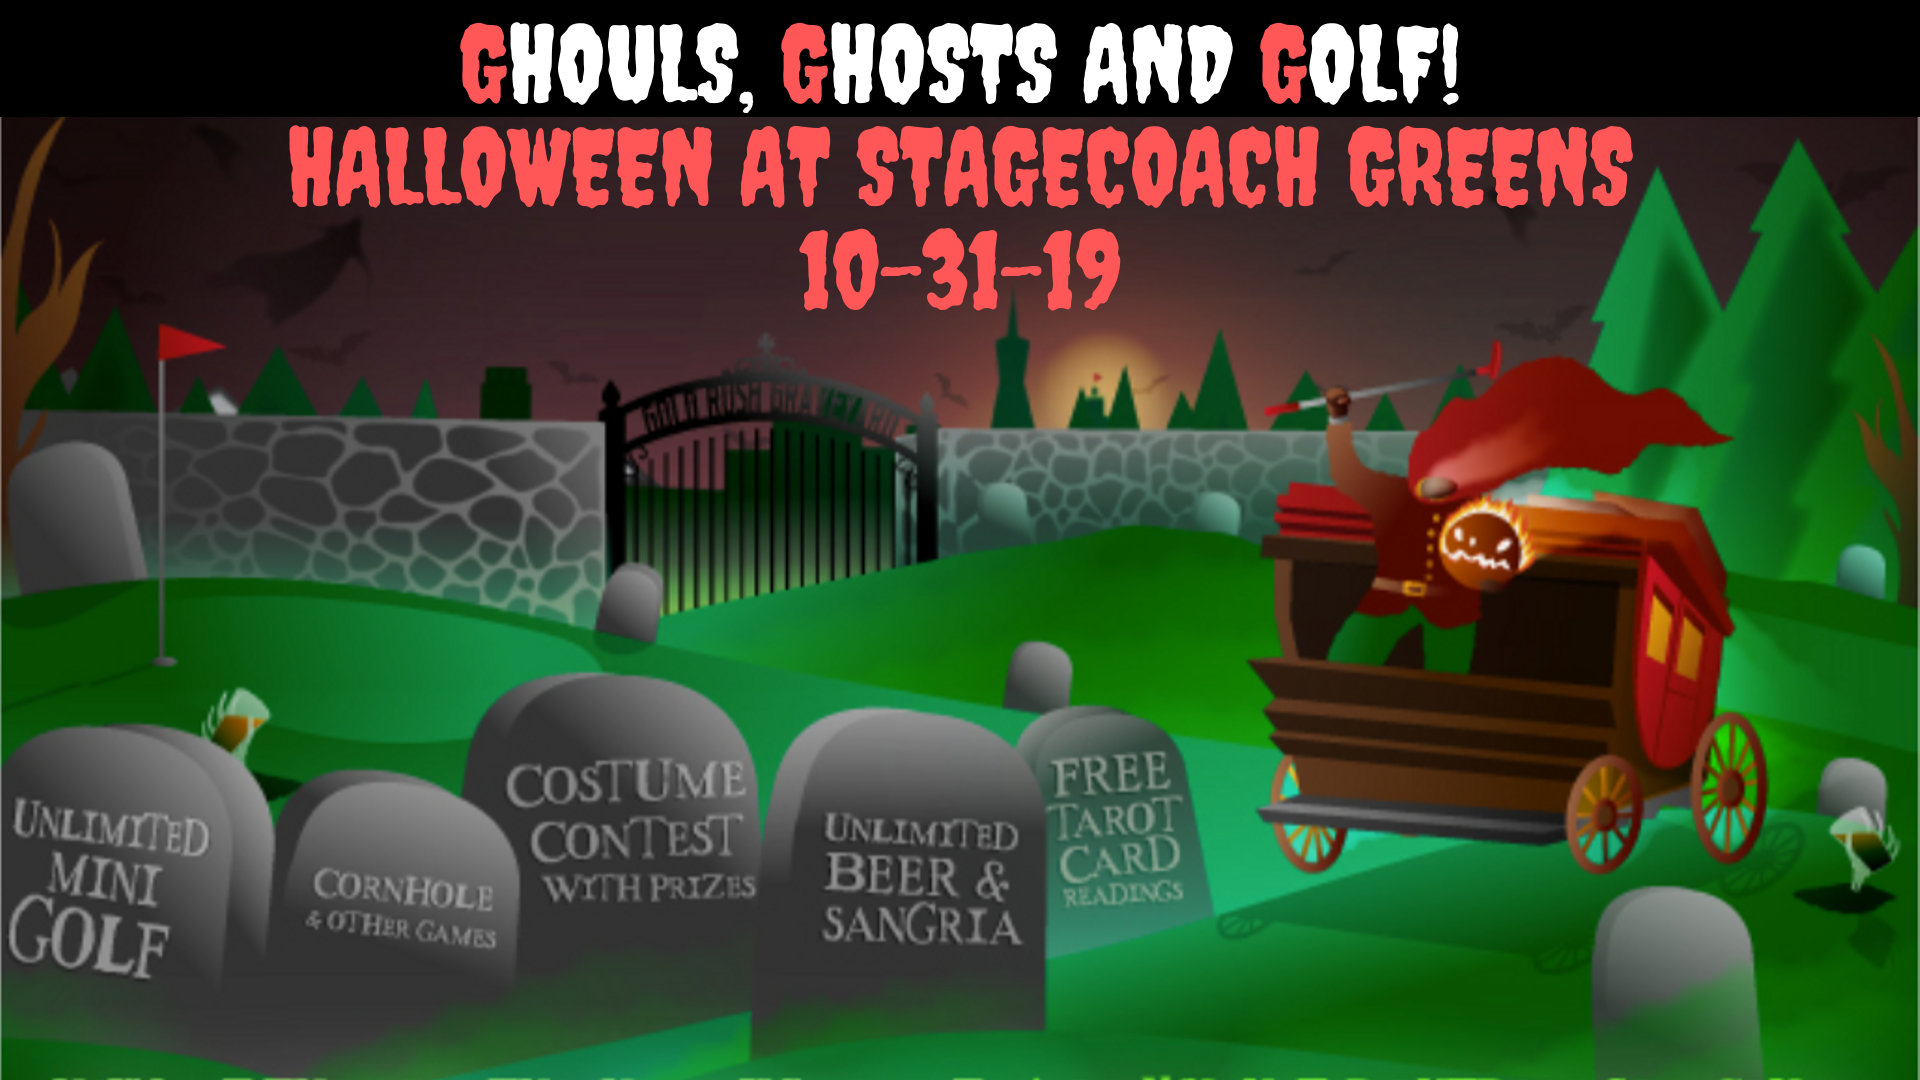 GHOULS, GHOSTS & GOLF! HAUNTED HALLOWEEN AT STAGEC